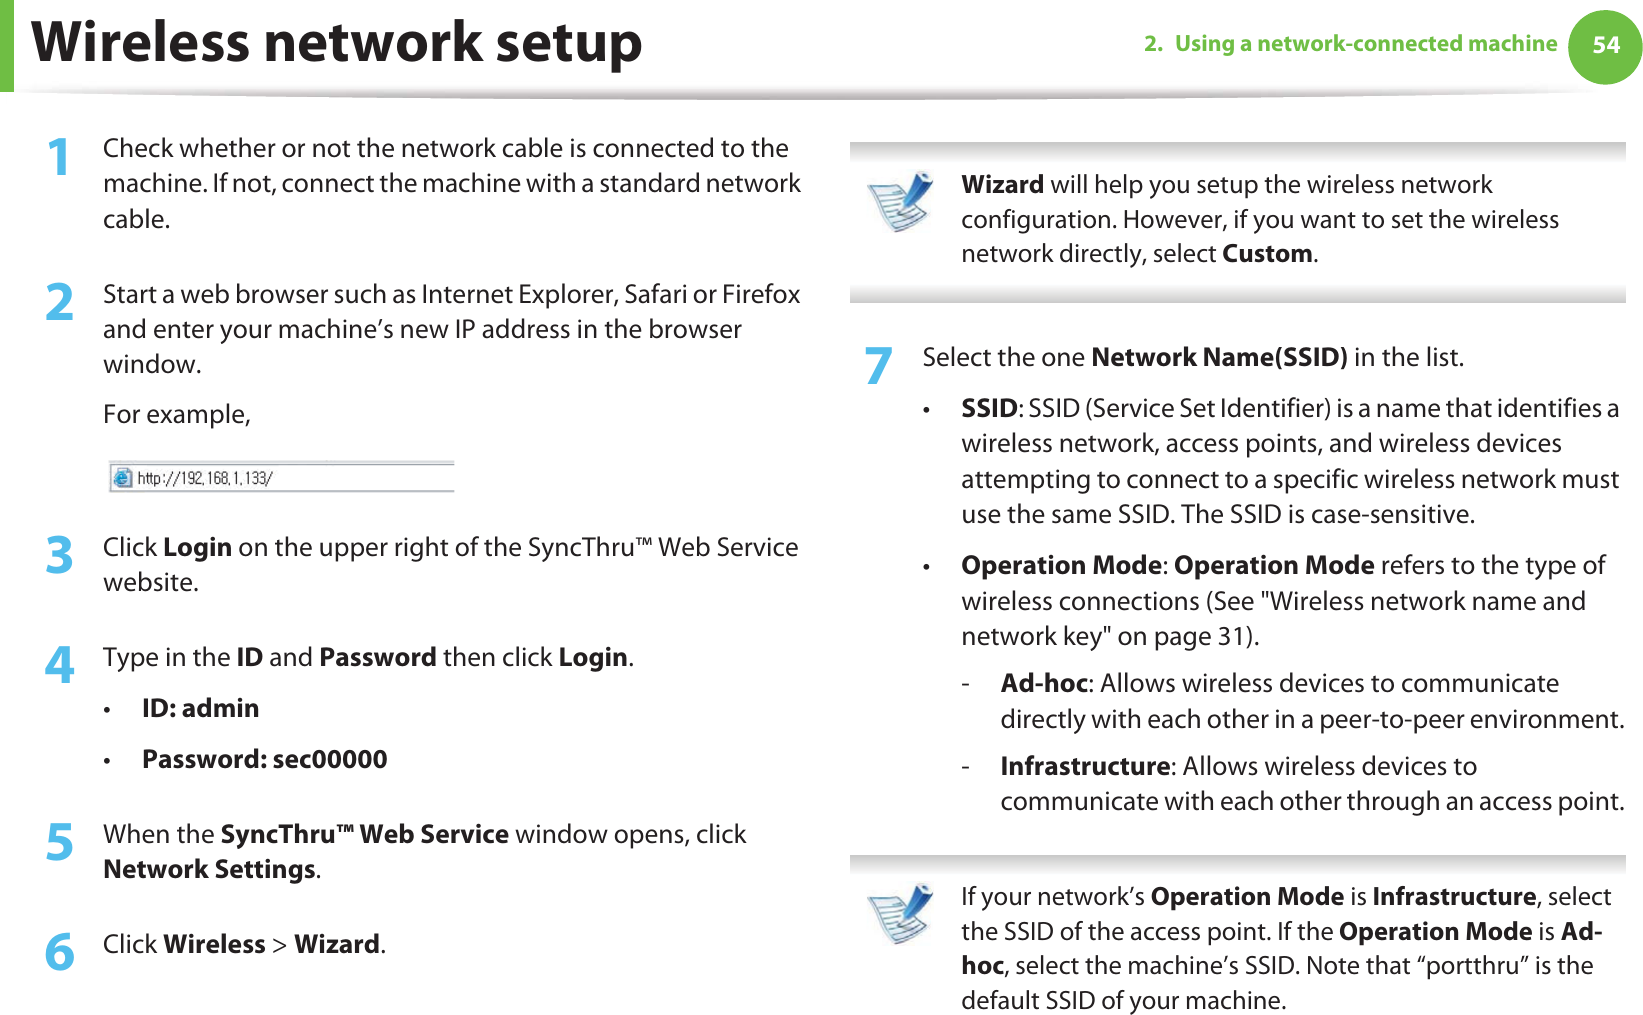 Wireless network setup 542. Using a network-connected machine1Check whether or not the network cable is connected to the machine. If not, connect the machine with a standard network cable.2  Start a web browser such as Internet Explorer, Safari or Firefox and enter your machine’s new IP address in the browser window.For example,3  Click Login on the upper right of the SyncThru™ Web Service website.4  Type in the ID and Password then click Login.•ID: admin •Password: sec000005  When the SyncThru™ Web Service window opens, click Network Settings.6  Click Wireless &gt; Wizard. Wizard will help you setup the wireless network configuration. However, if you want to set the wireless network directly, select Custom. 7  Select the one Network Name(SSID) in the list.•SSID: SSID (Service Set Identifier) is a name that identifies a wireless network, access points, and wireless devices attempting to connect to a specific wireless network must use the same SSID. The SSID is case-sensitive.•Operation Mode: Operation Mode refers to the type of wireless connections (See &quot;Wireless network name and network key&quot; on page 31).-Ad-hoc: Allows wireless devices to communicate directly with each other in a peer-to-peer environment.-Infrastructure: Allows wireless devices to communicate with each other through an access point. If your network’s Operation Mode is Infrastructure, select the SSID of the access point. If the Operation Mode is Ad-hoc, select the machine’s SSID. Note that “portthru” is the default SSID of your machine. 